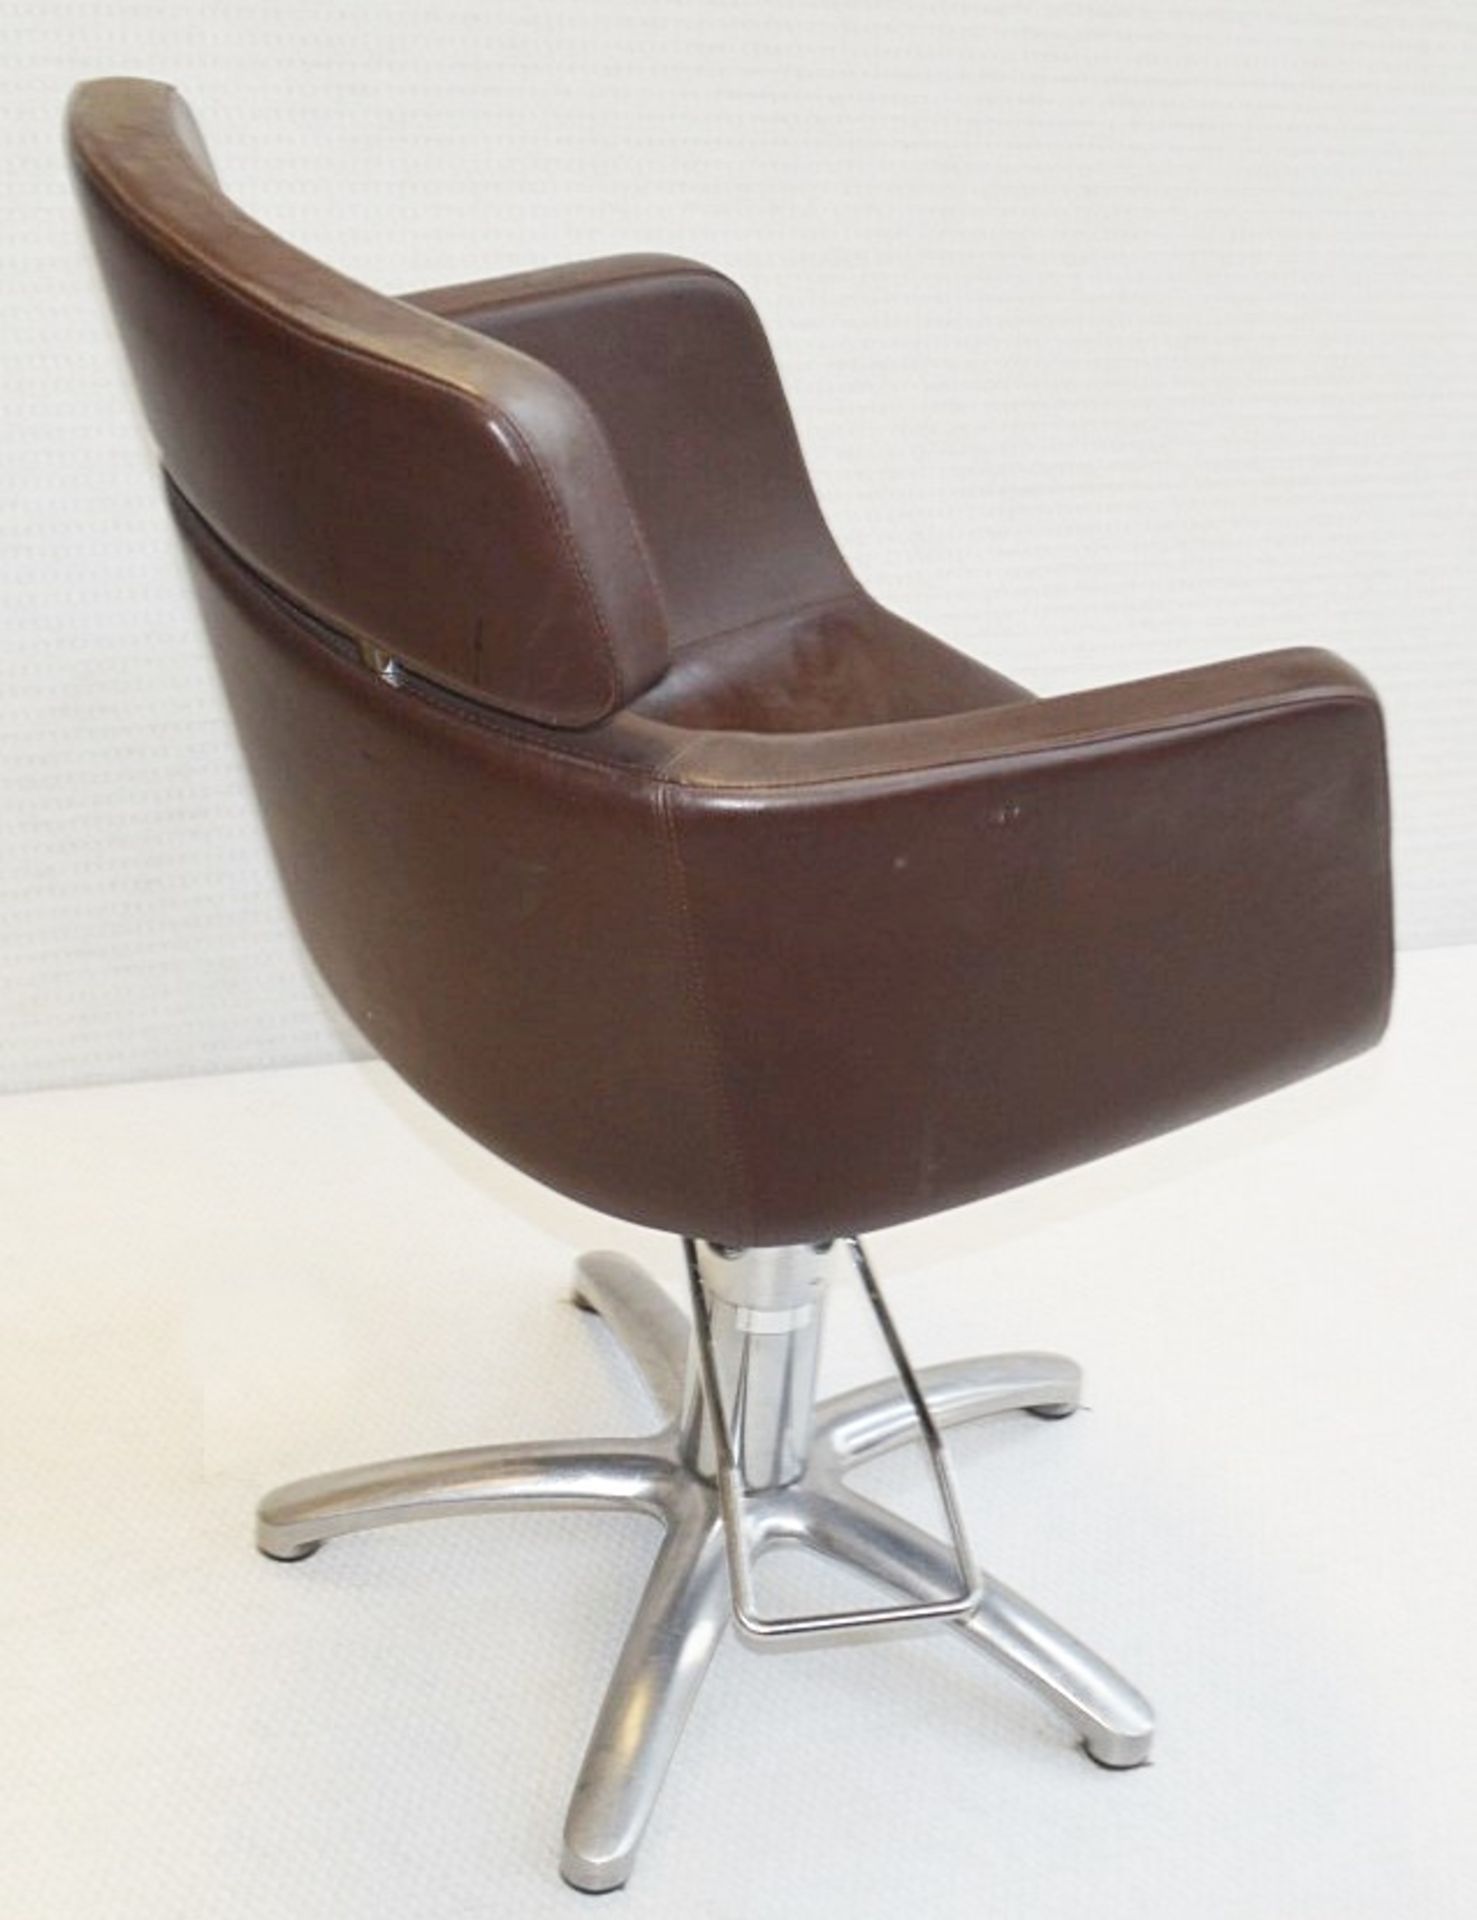 5 x Malet Branded Professional Hairdressing Salon Swivel Chairs In Brown - Each Is Supplied With A - Image 7 of 7